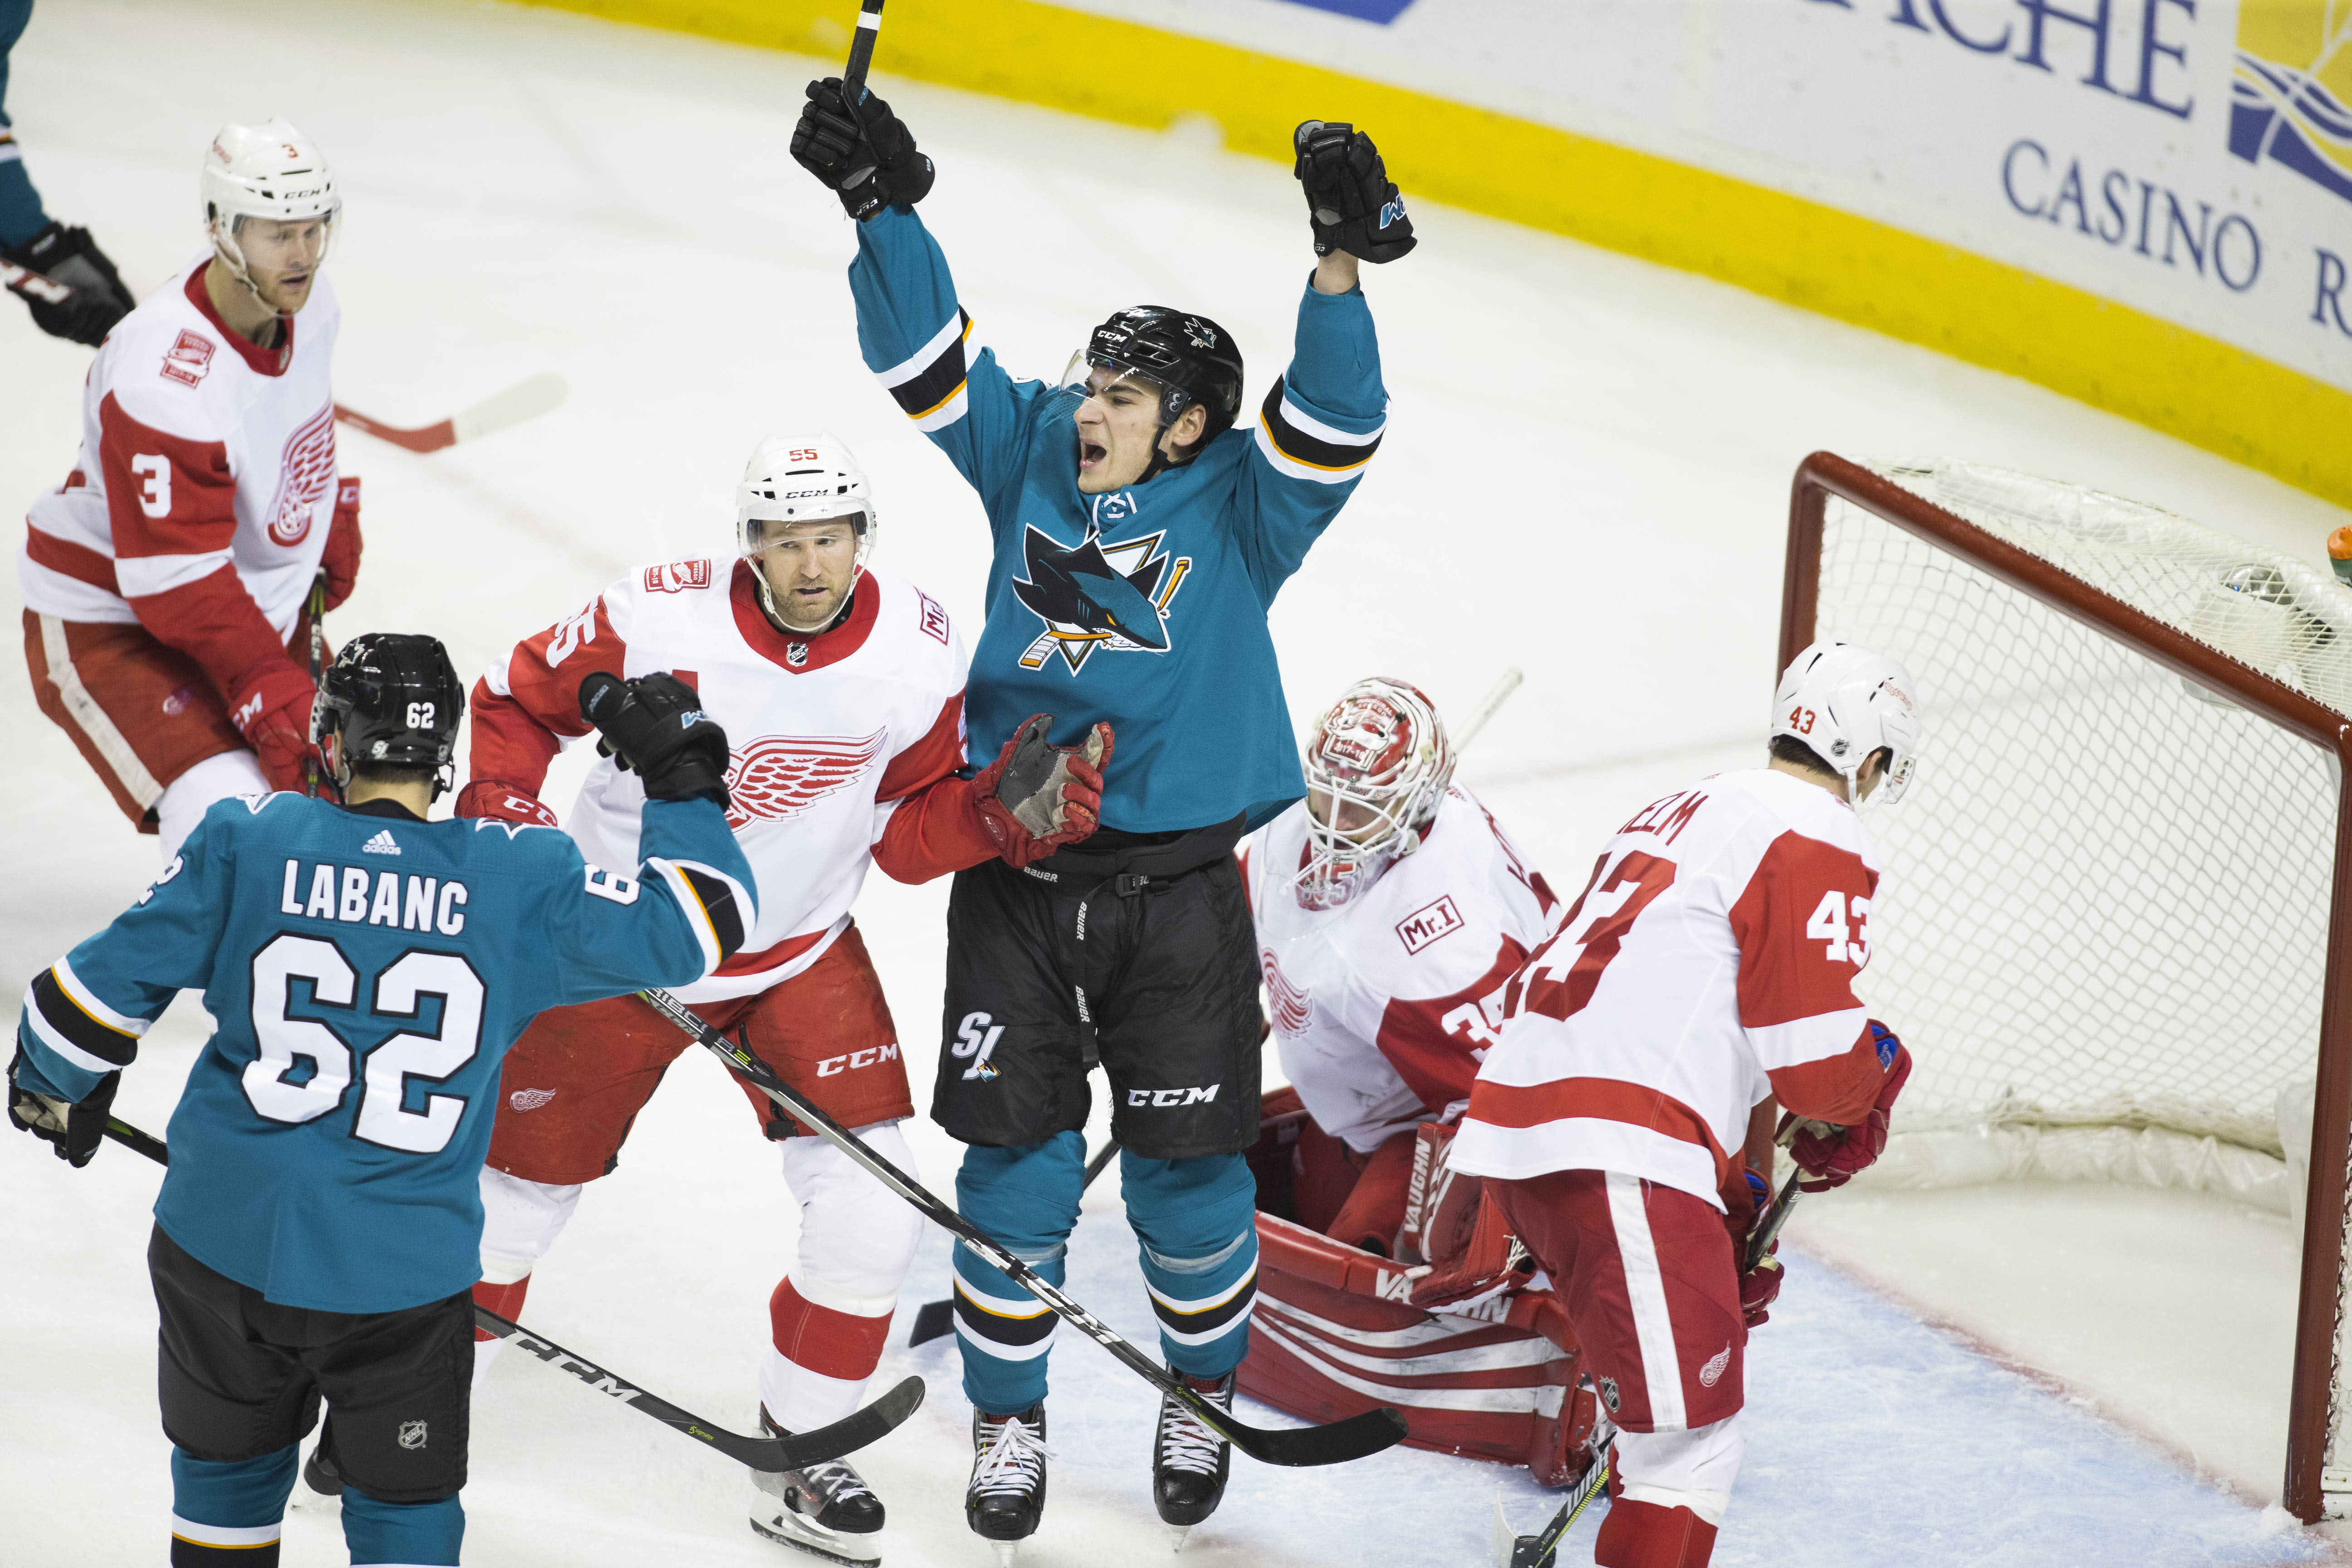 Mar 12, 2018; San Jose, CA, USA; San Jose Sharks right wing Timo Meier (28) celebrates after scoring a goal against Detroit Red Wings goalie Jimmy Howard (35) during the third period at SAP Center at San Jose.